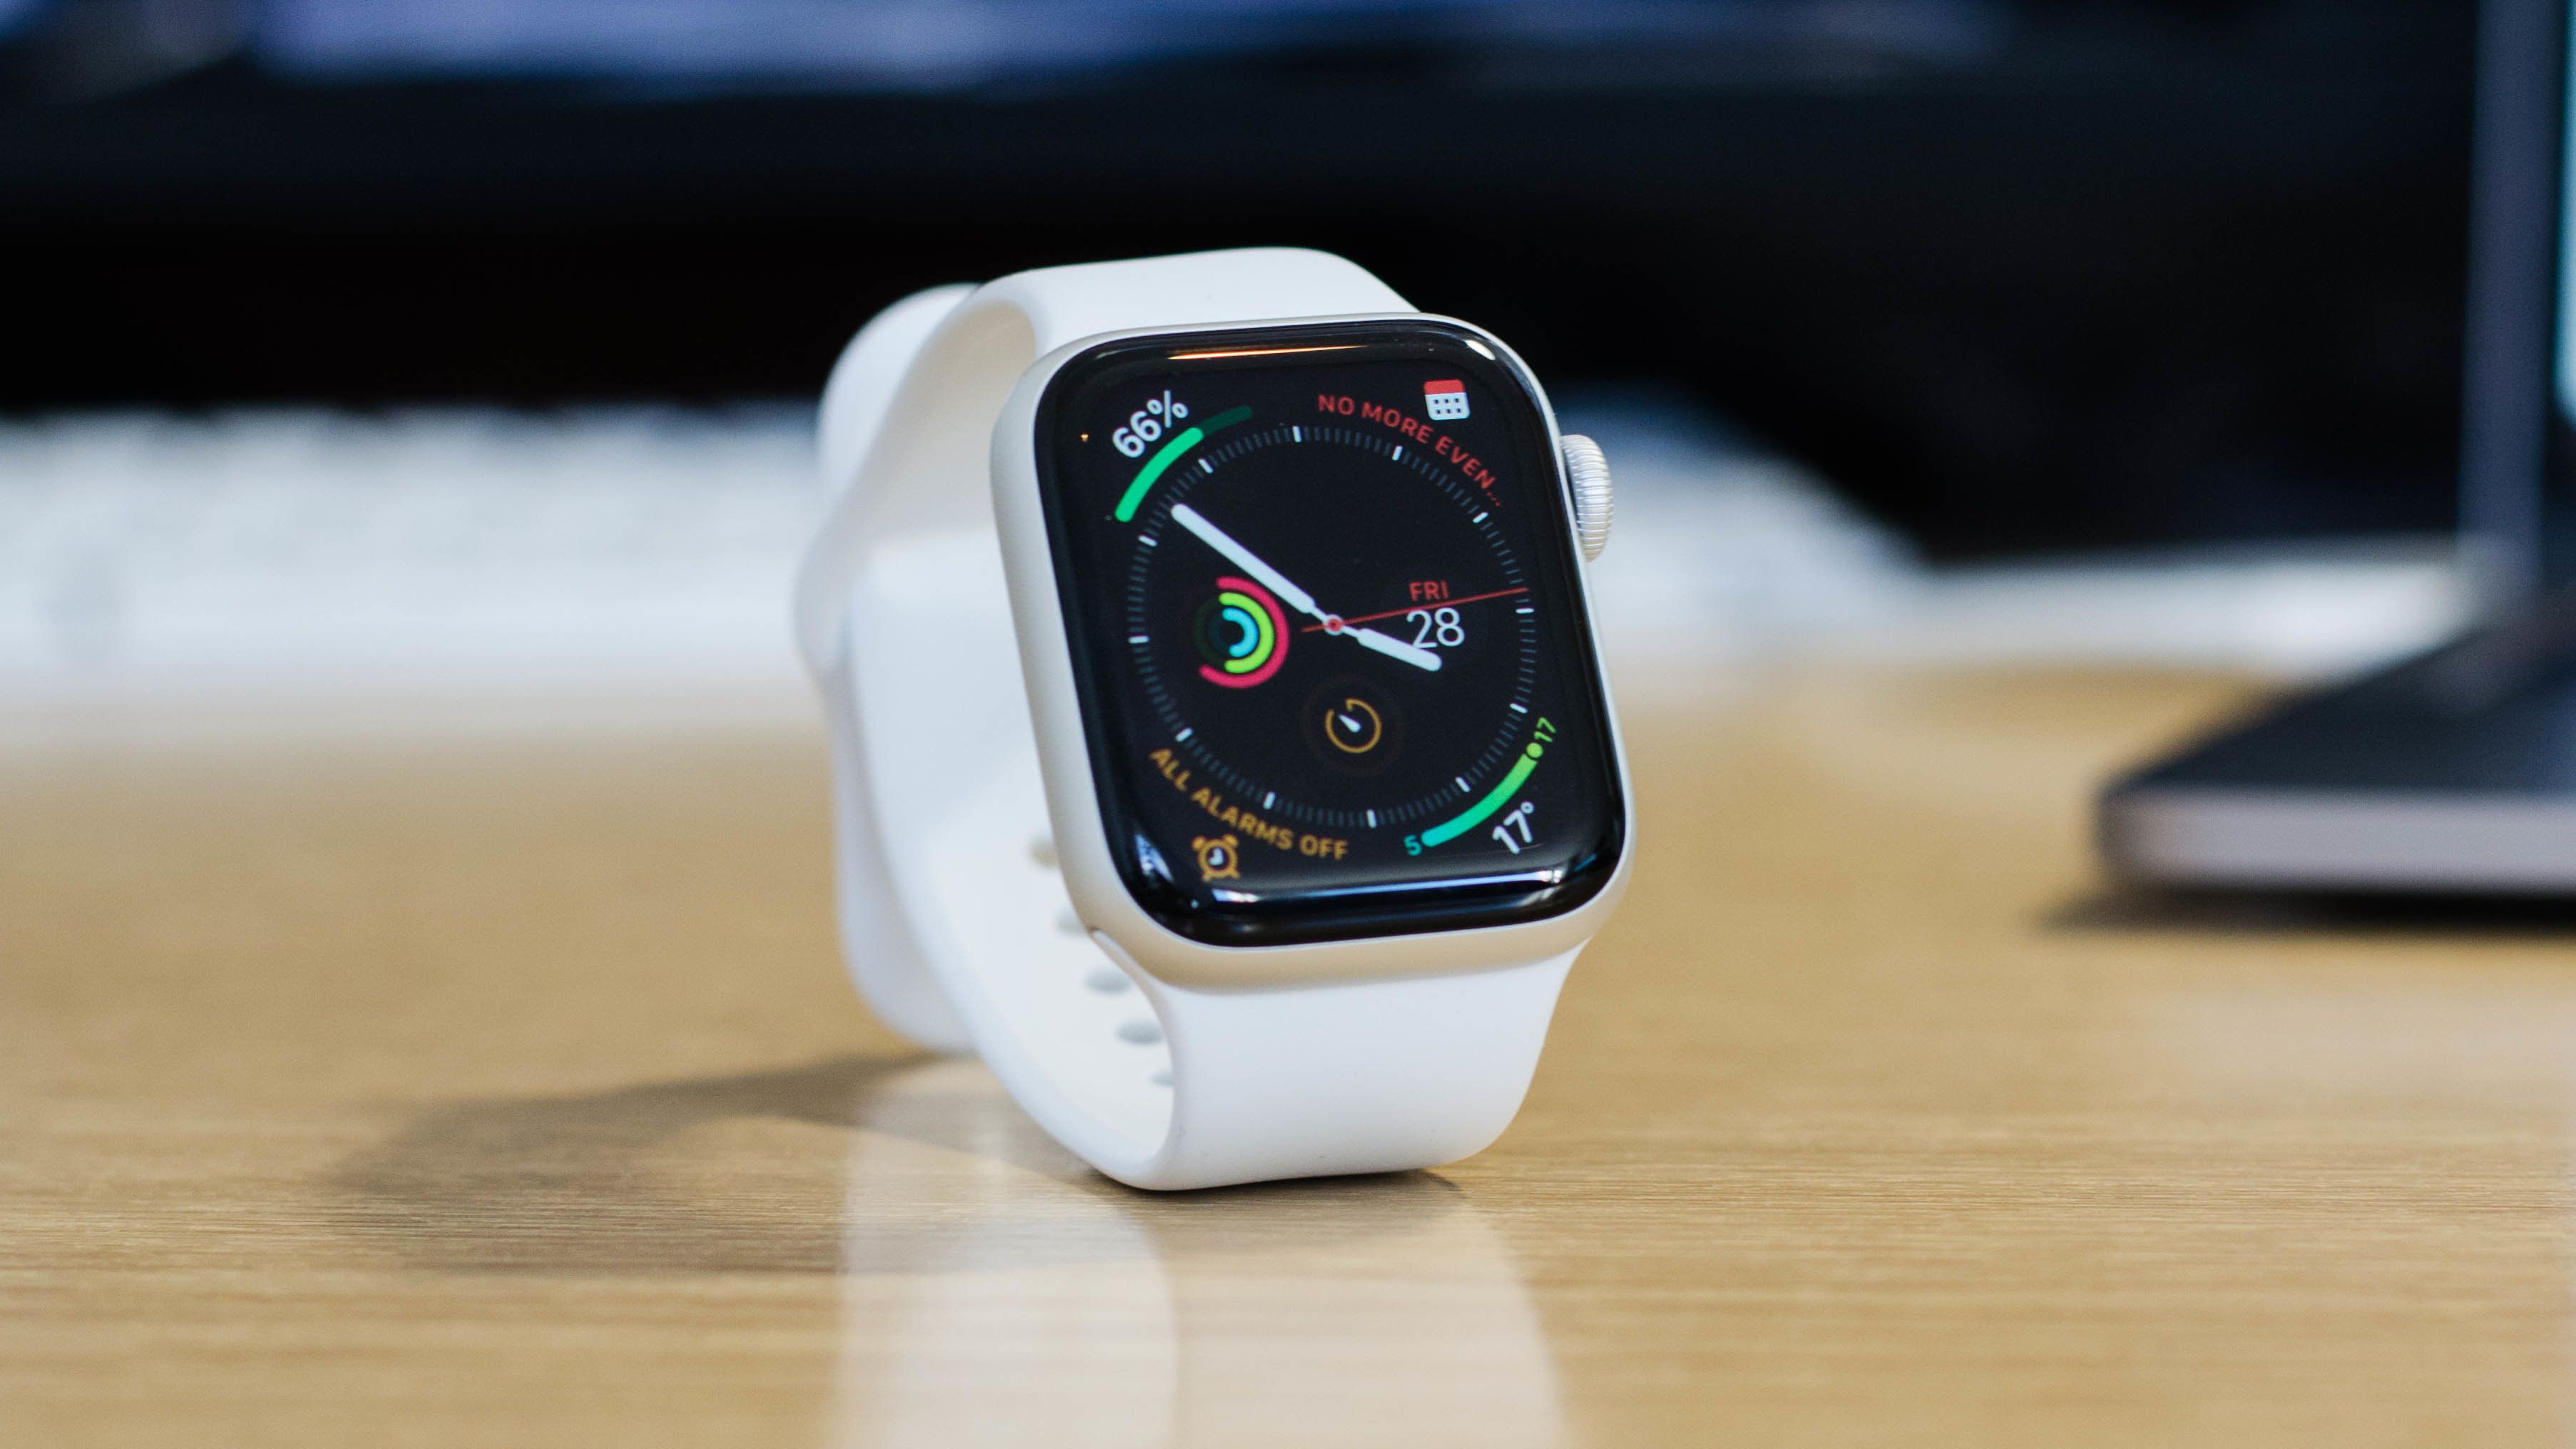 Apple Watch Series 4 review: Bigger, faster and even more health